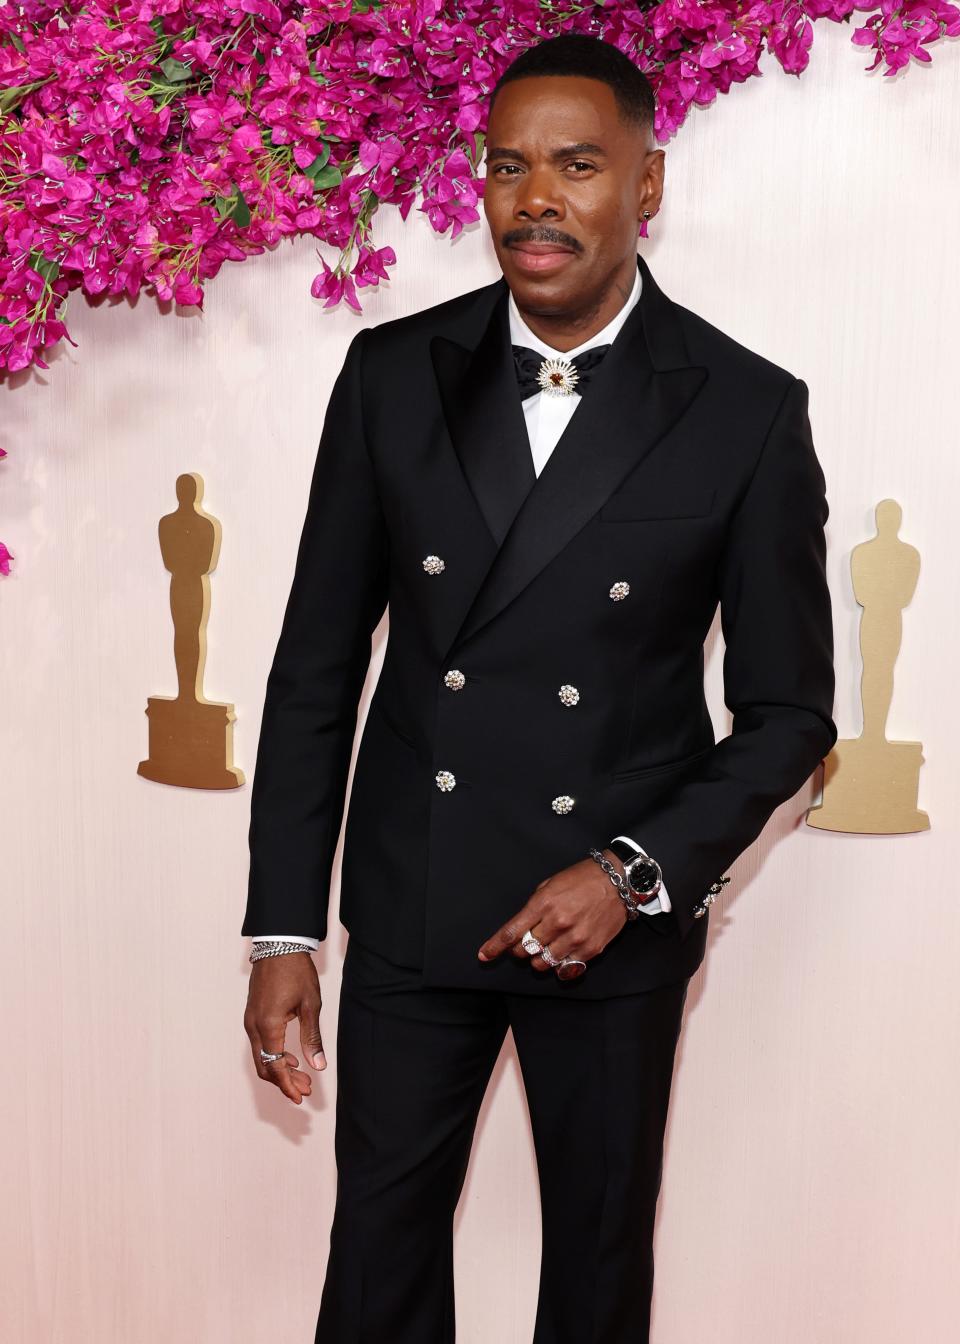 HOLLYWOOD, CALIFORNIA - MARCH 10: Colman Domingo attends the 96th Annual Academy Awards on March 10, 2024 in Hollywood, California. (Photo by Marleen Moise/Getty Images)